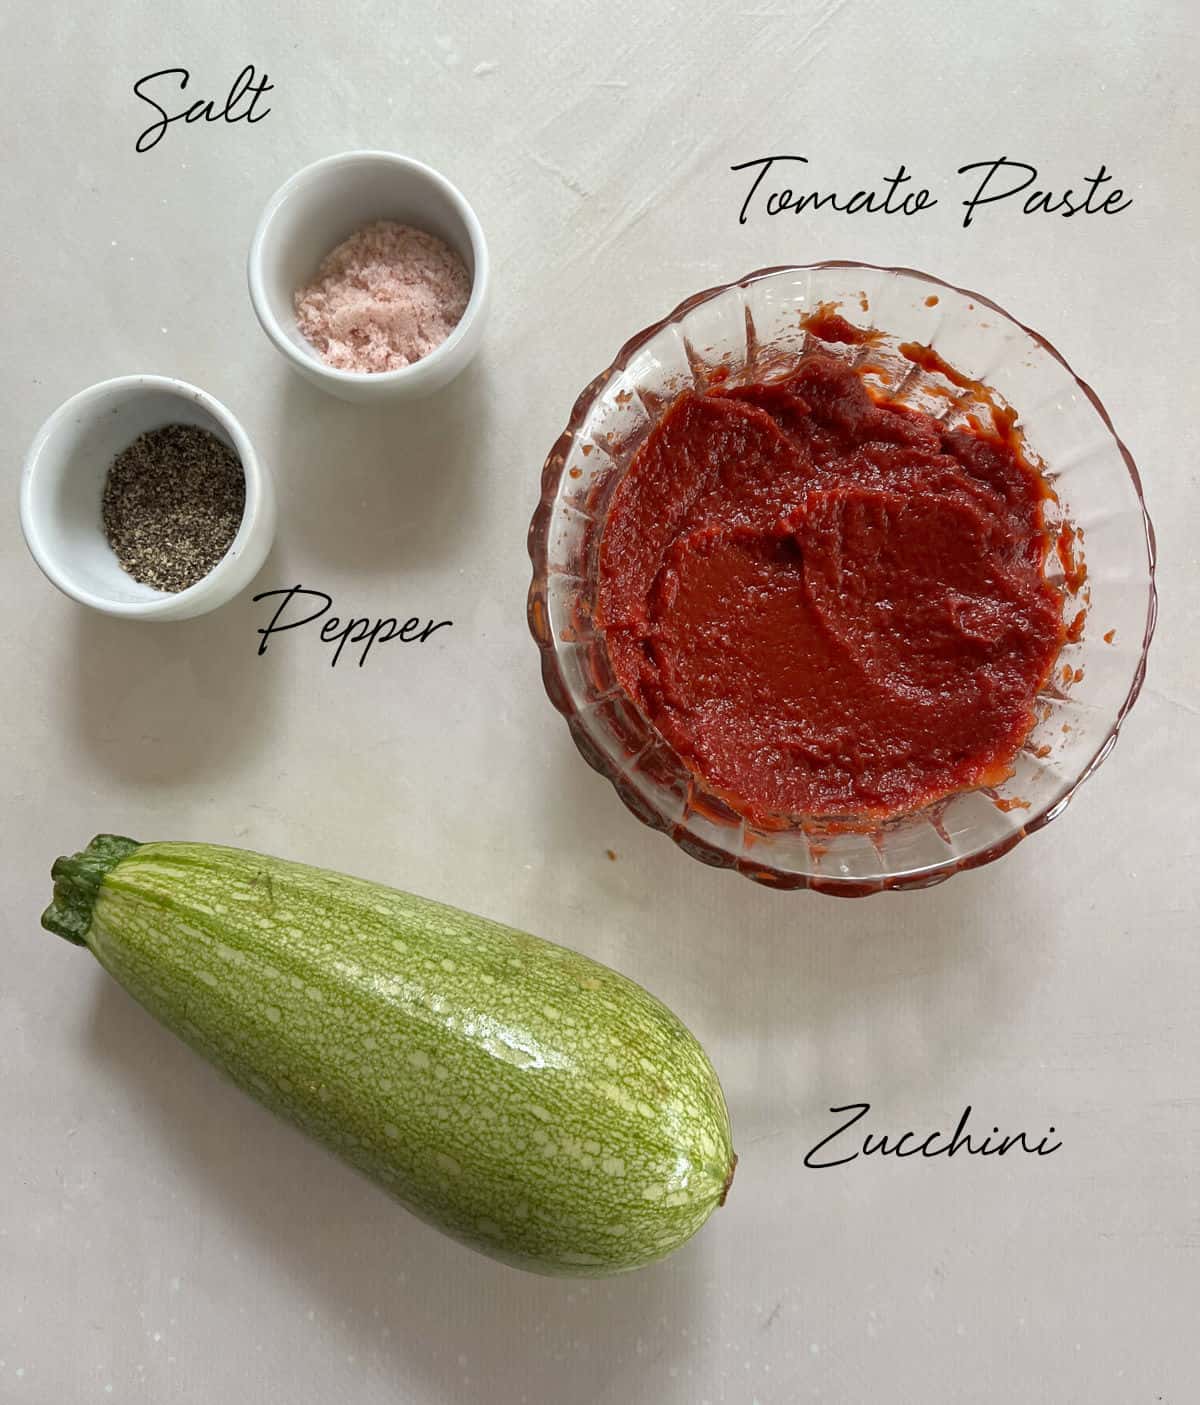 zucchini, tomato paste, salt and pepper laid out